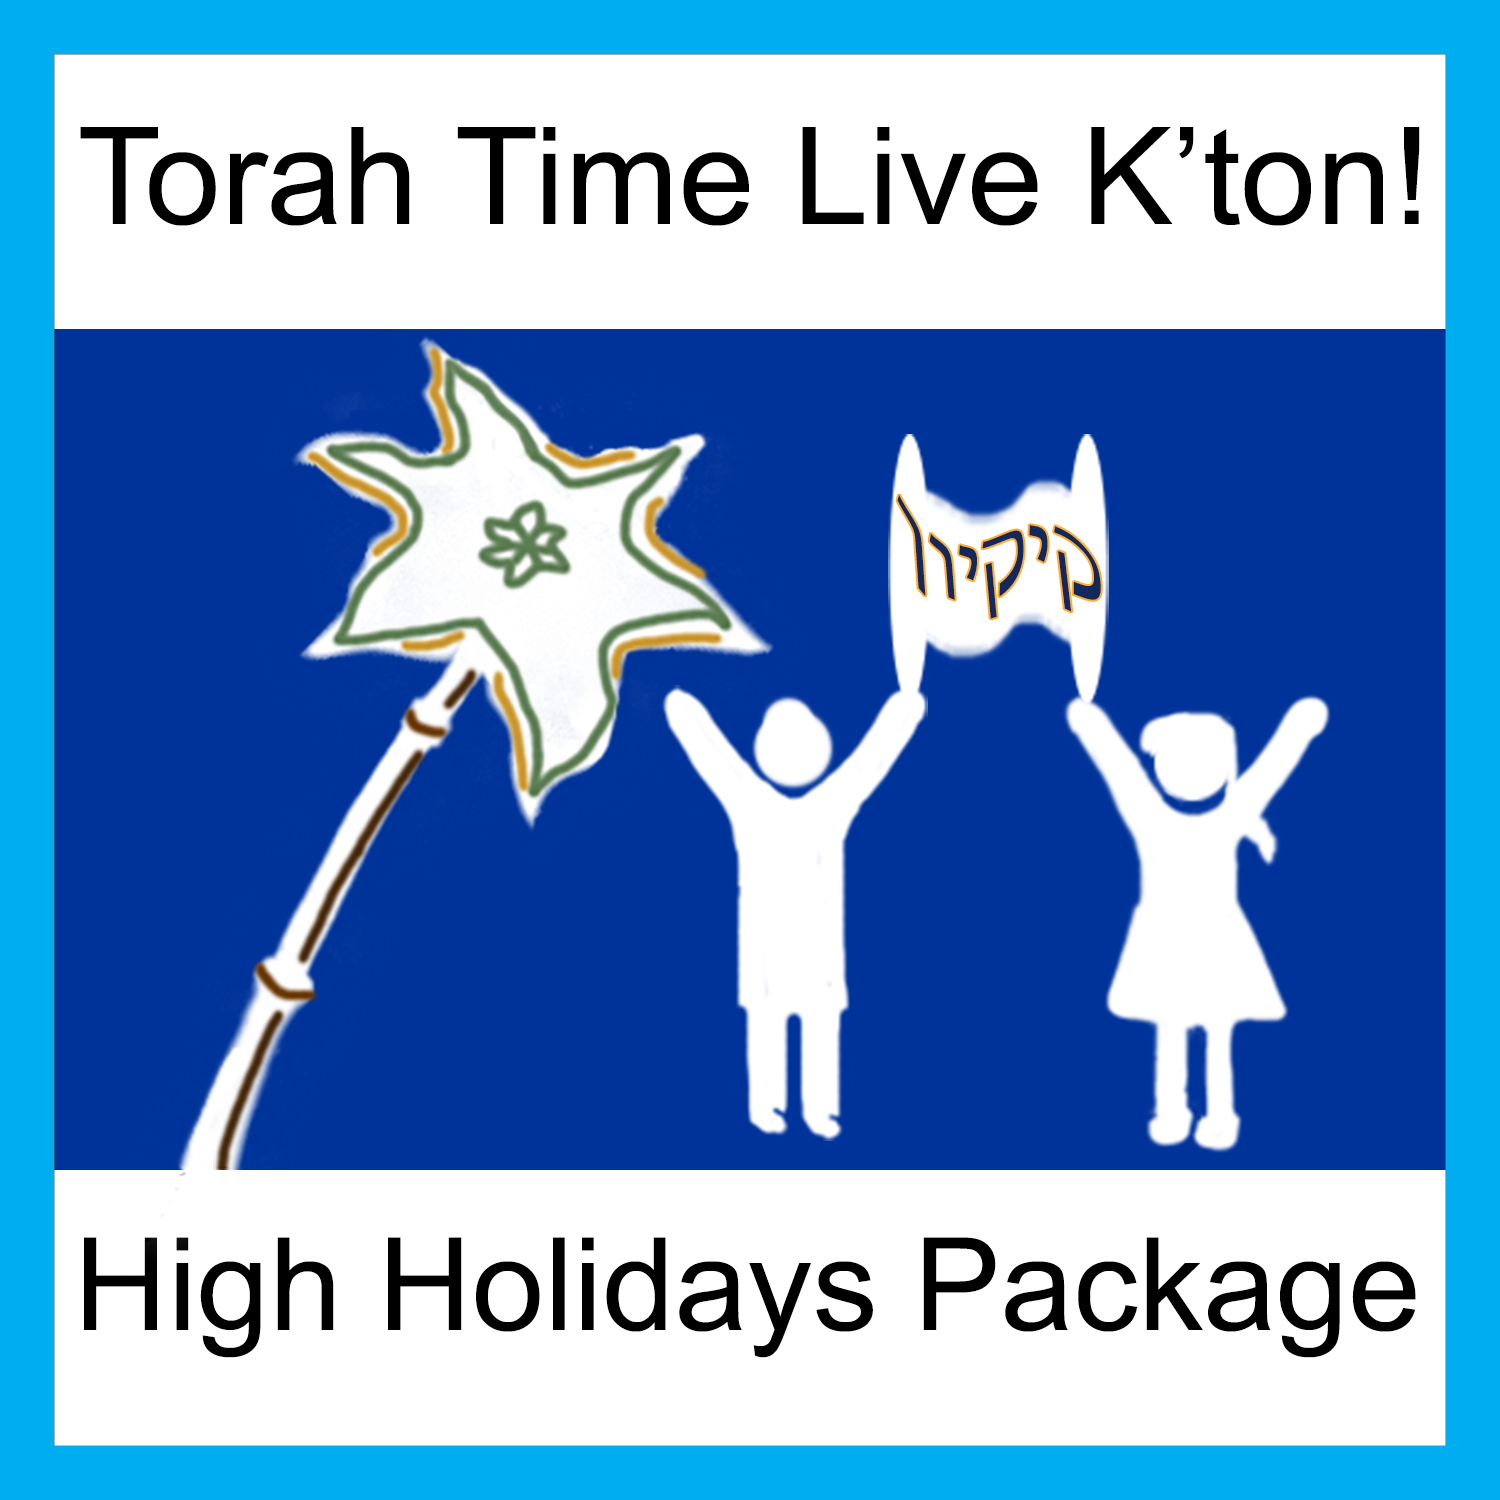 The "Torah Time Live K'ton!" High Holidays Package for Grades K-7 [includes RH 1 & 2 + YK]